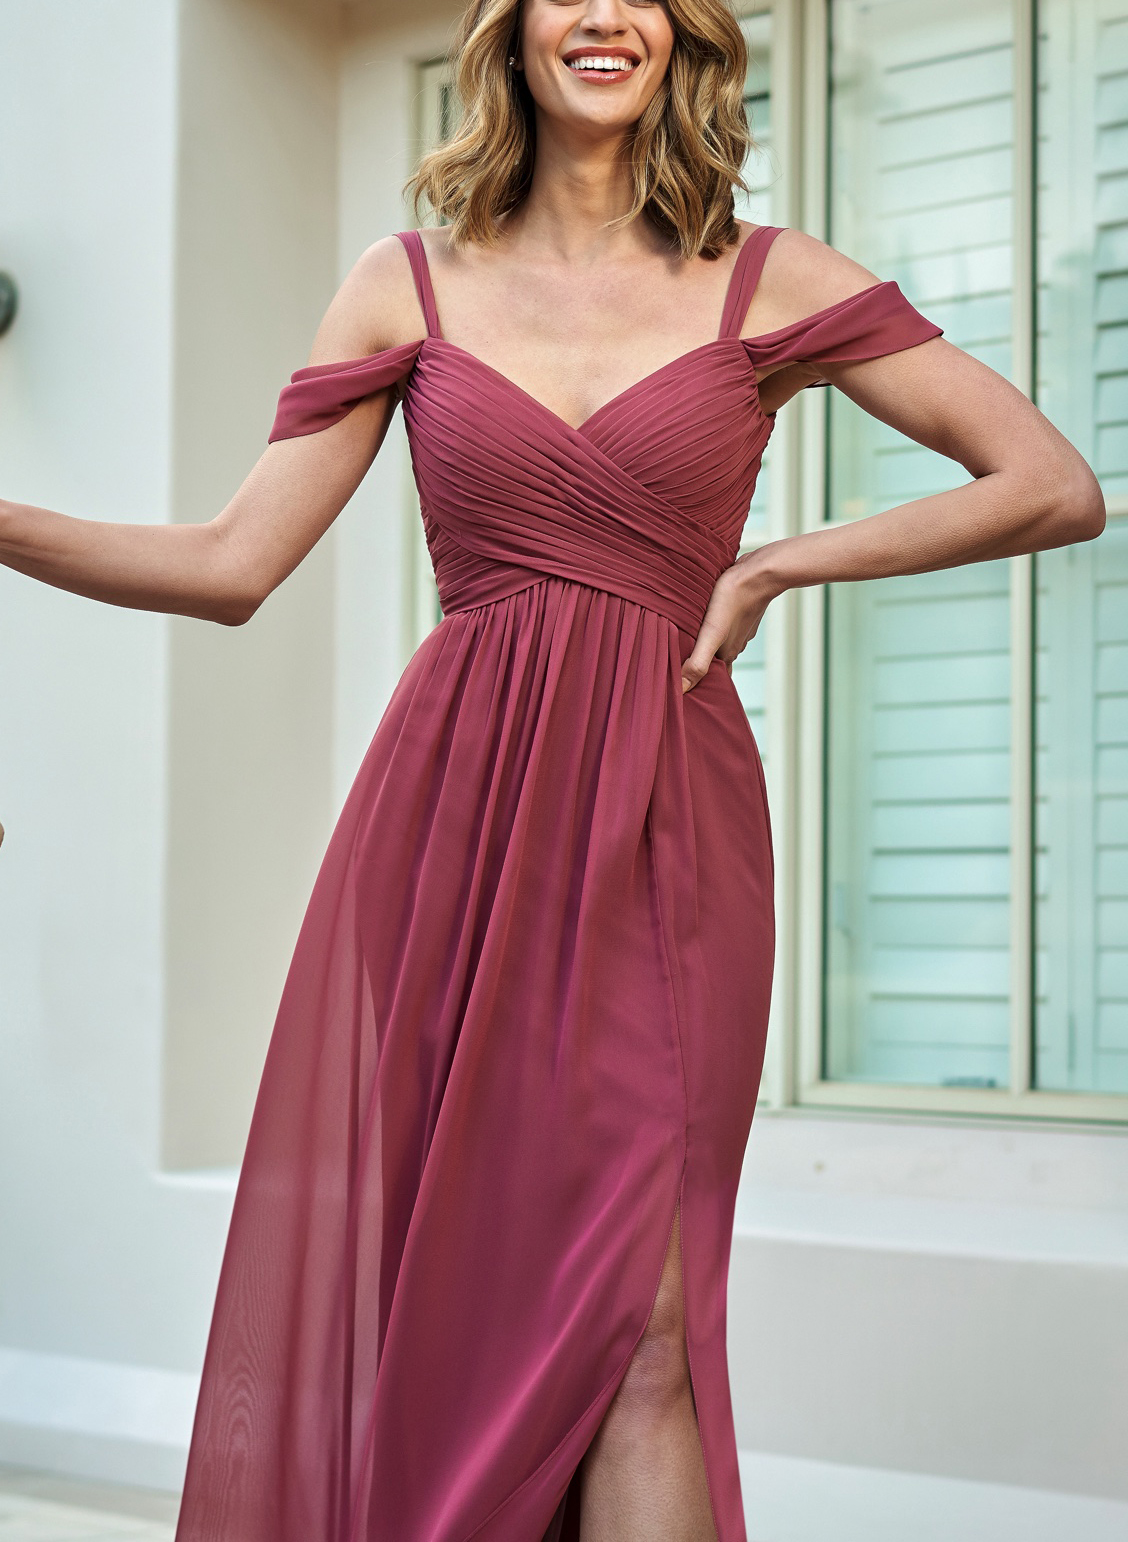 Cold Neckline A-Line Bridesmaid Dresses With Ruffle